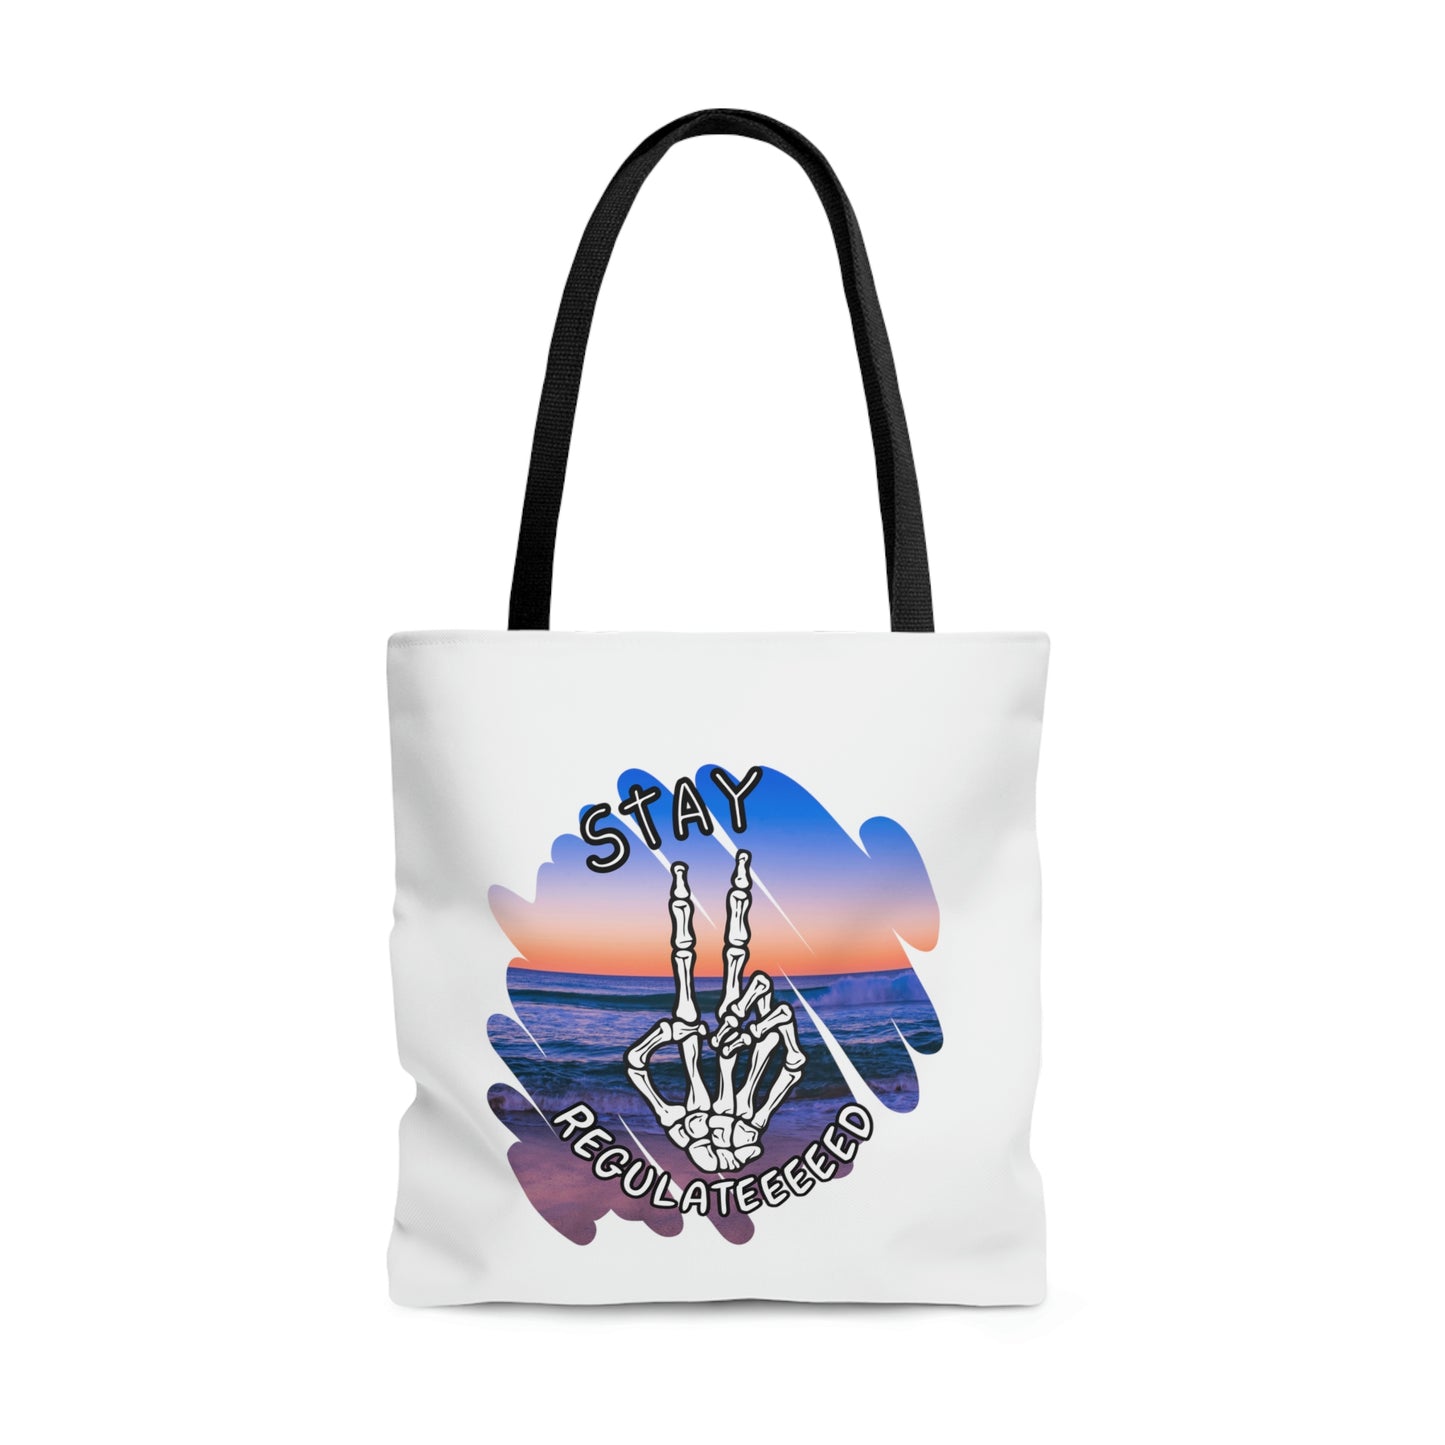 Stay Regulated [Gauthism Line] Tote Bag in 3 sizes